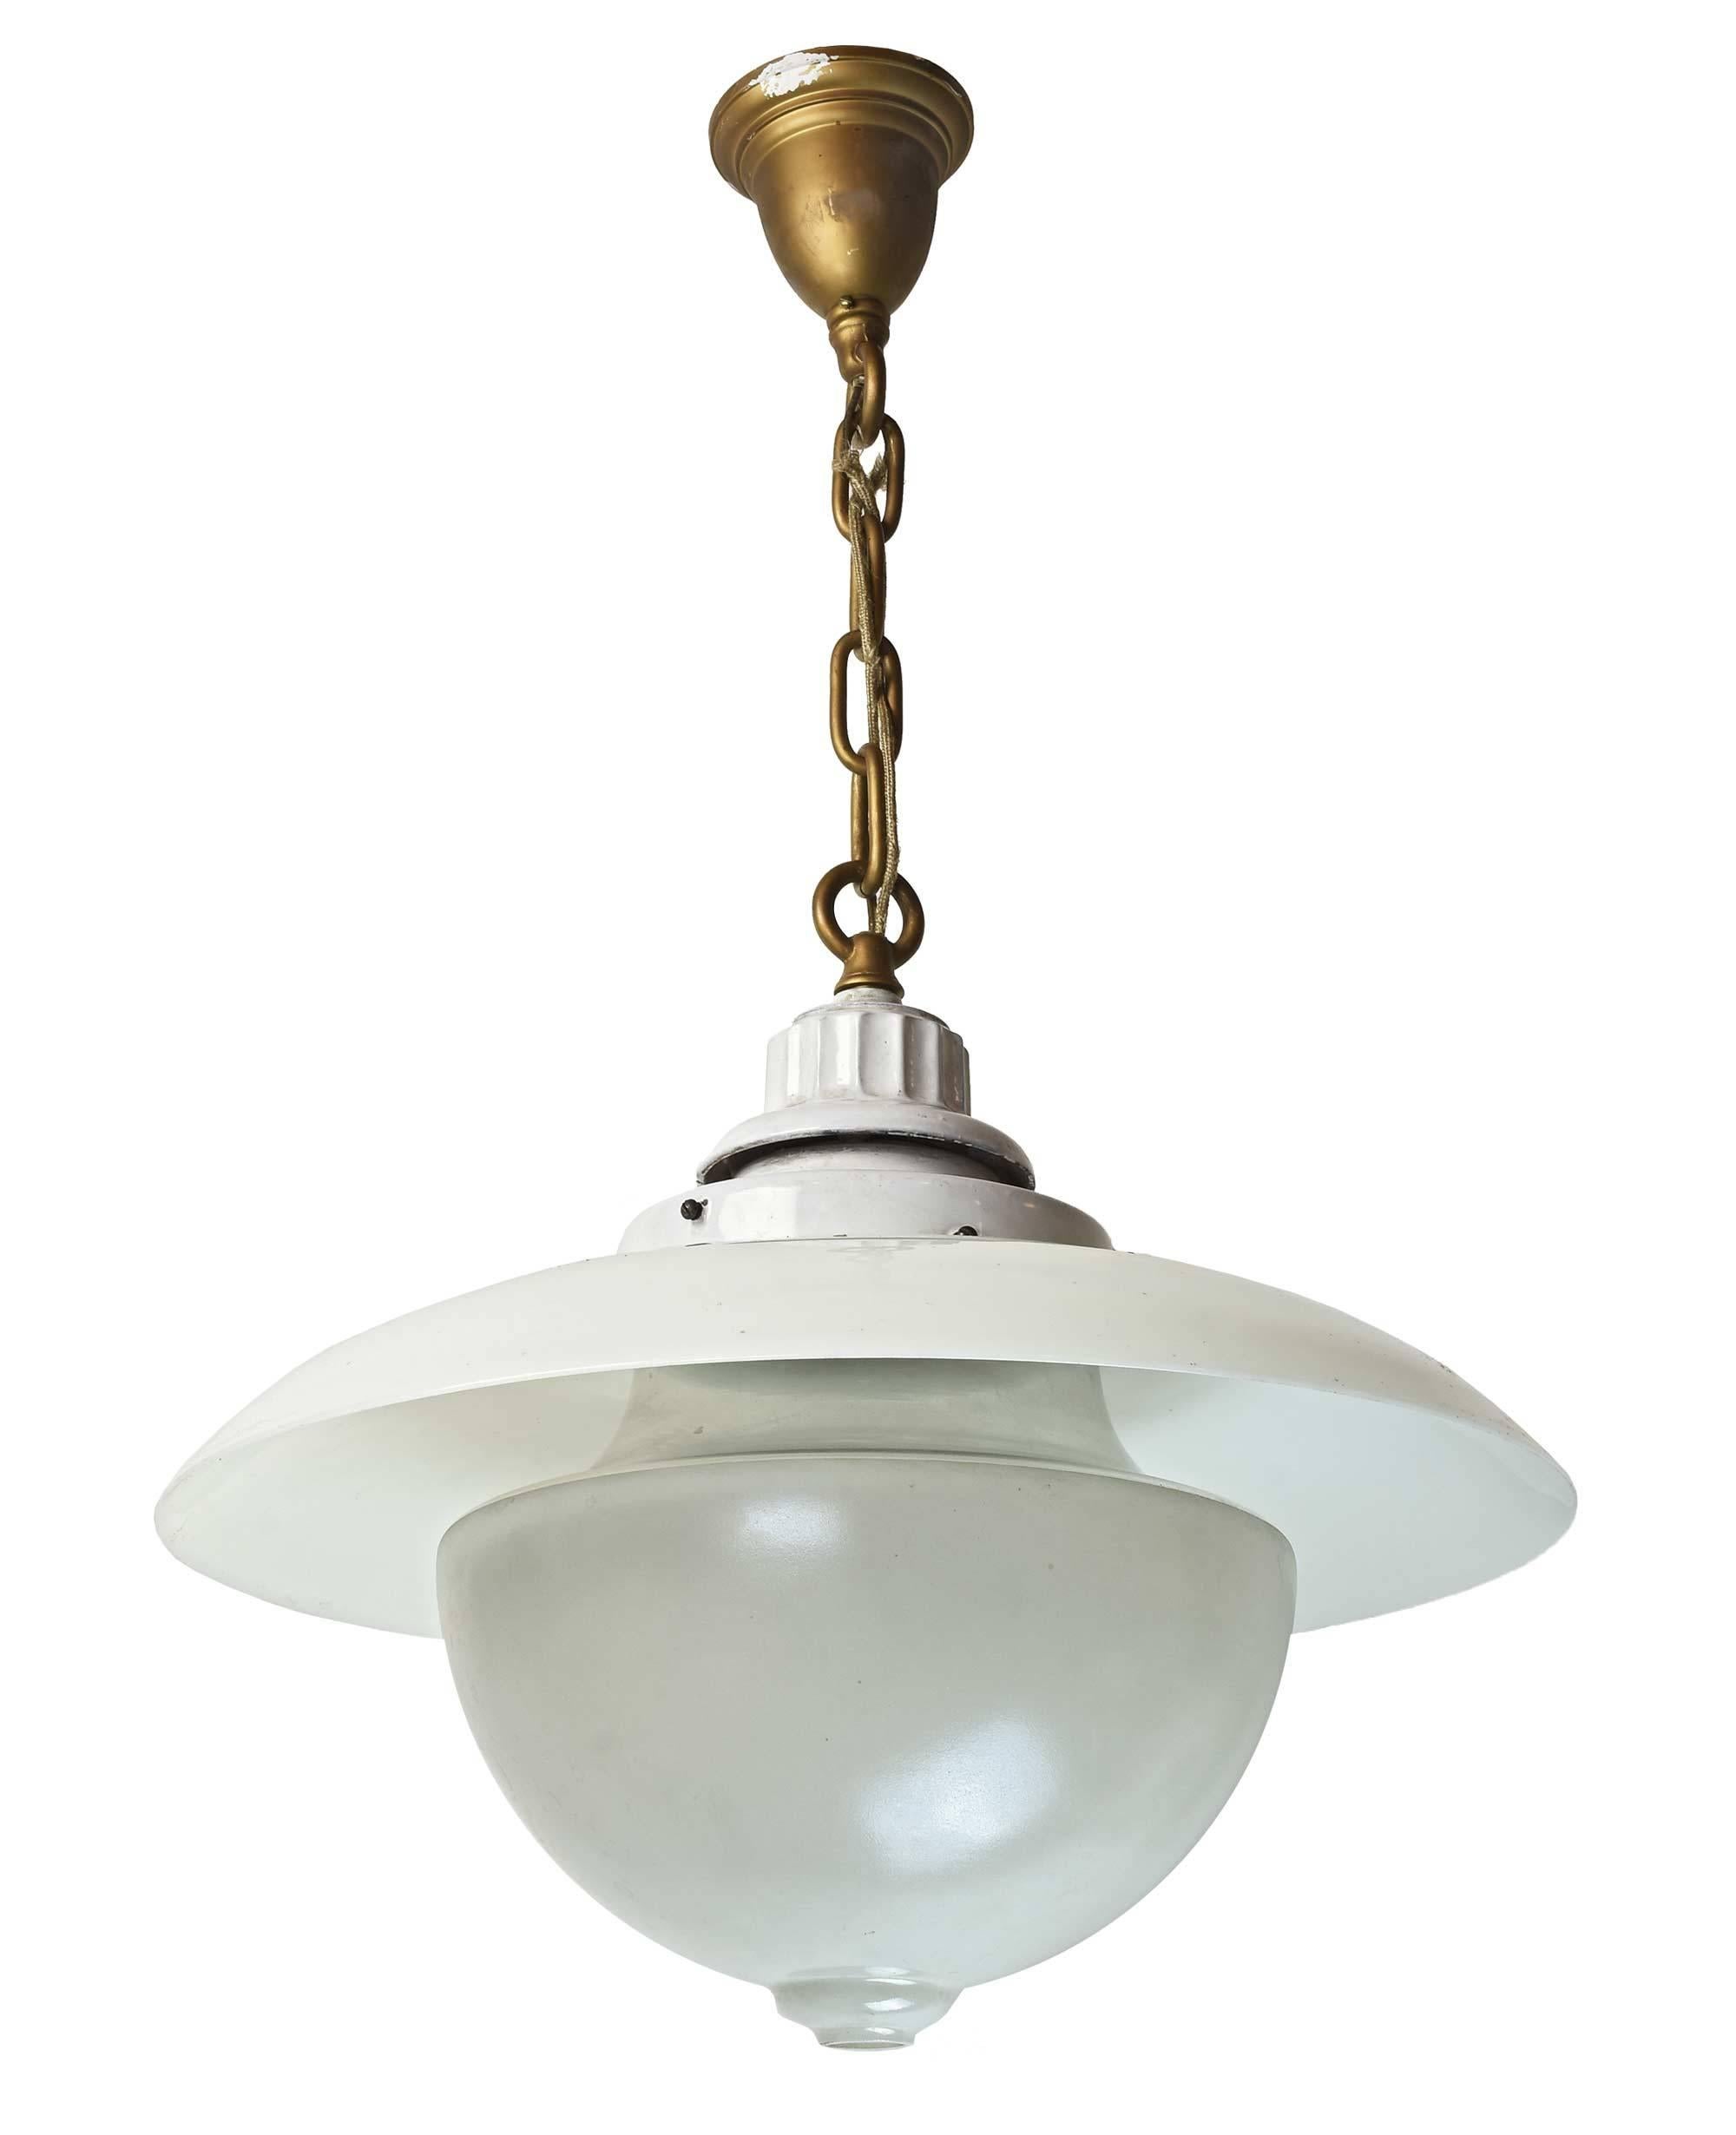 This is a great Beardslee transitional fixture. As Industrial lights moved towards what is now considered the 'school house' style, glass was used to deflect light. This unique two-piece system includes the reflector shade and the opaque main shade,